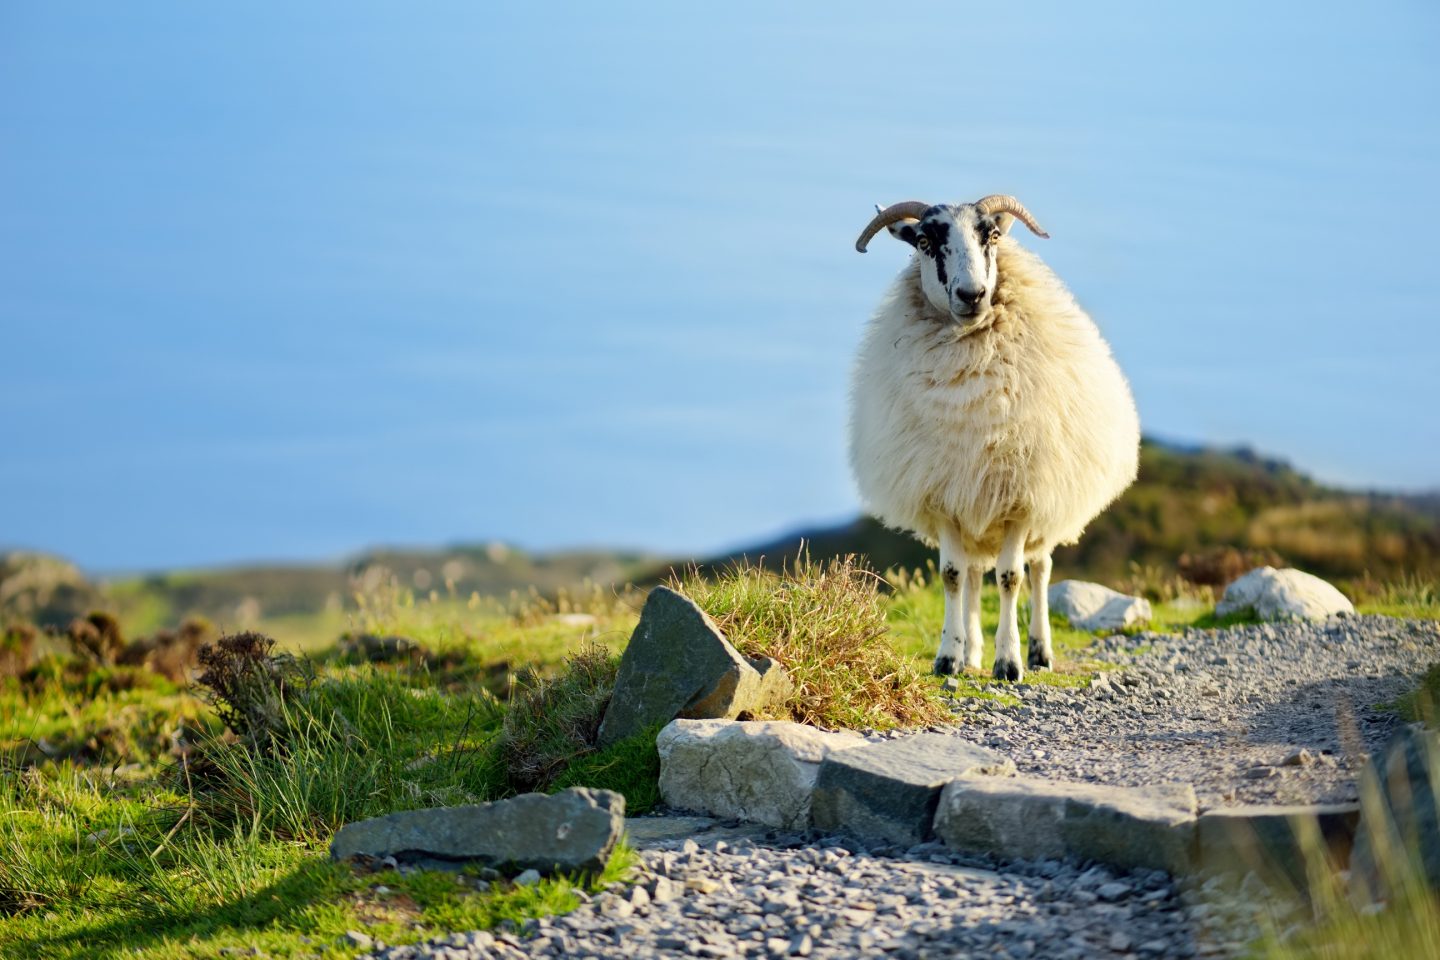 A Sheep enjoying the grass in the rugged landscape of Connemara in Ireland